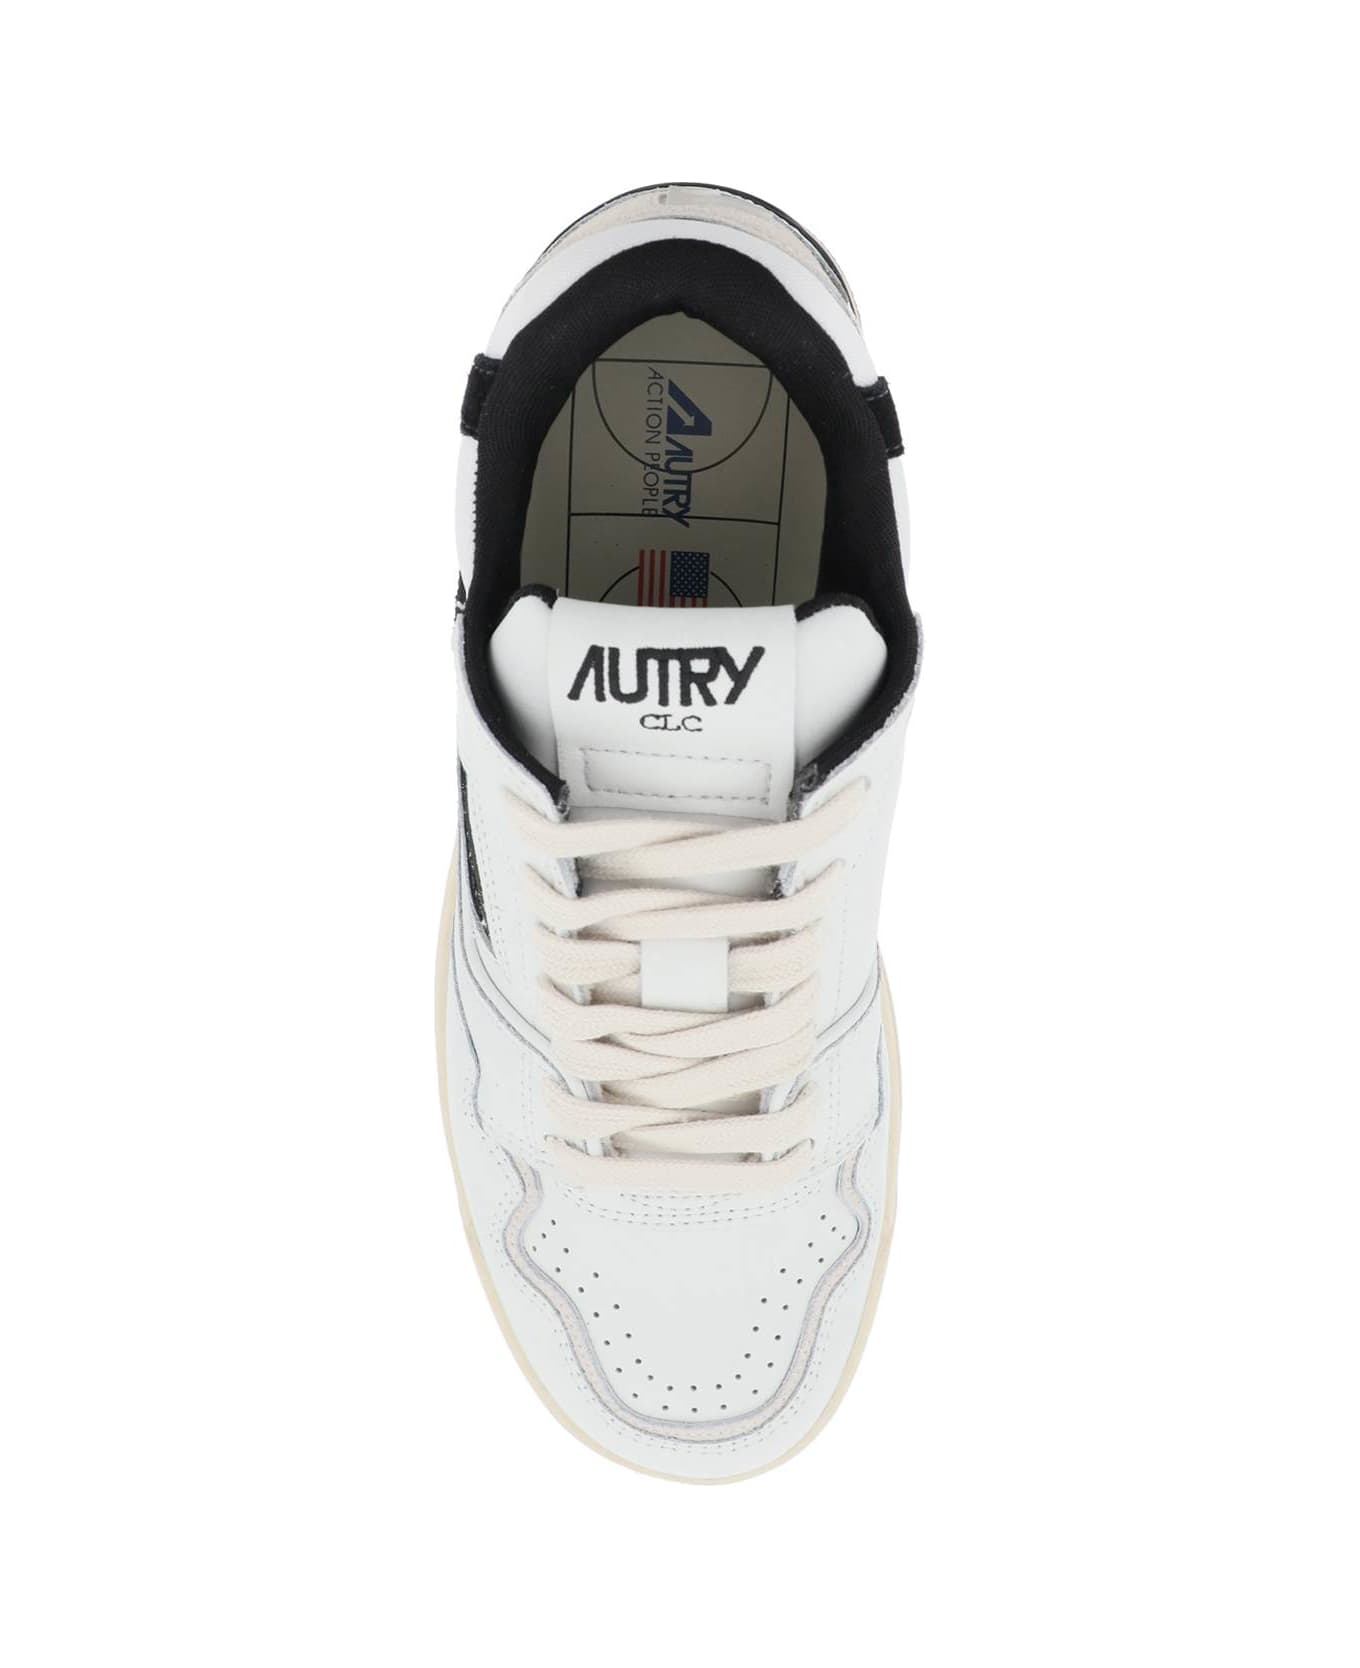 Autry Clc Low Sneakers - White